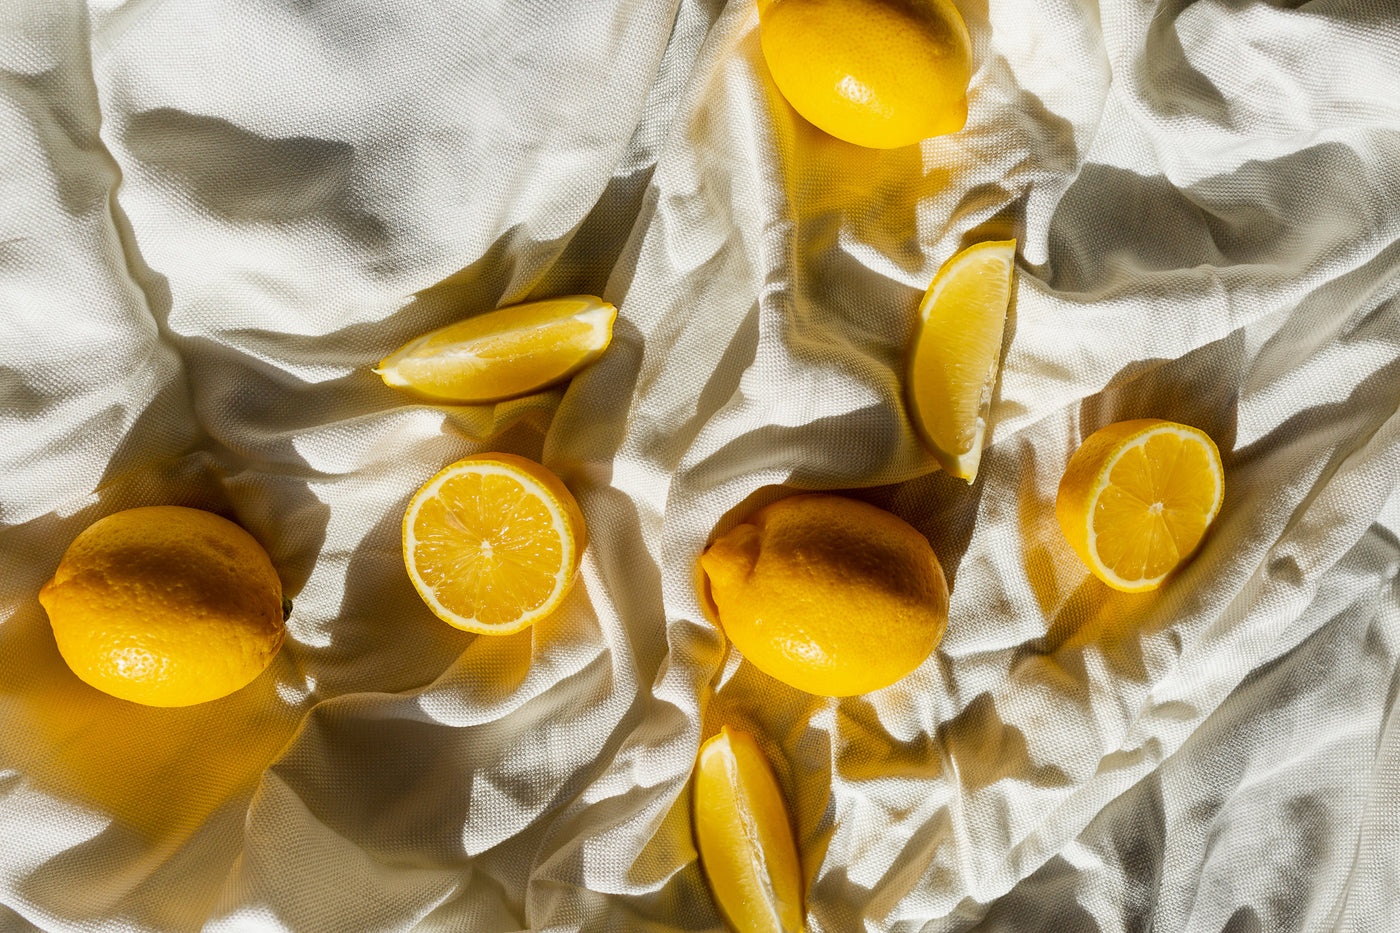 7 Smart Lemon Hacks To Clean & Disinfect The House